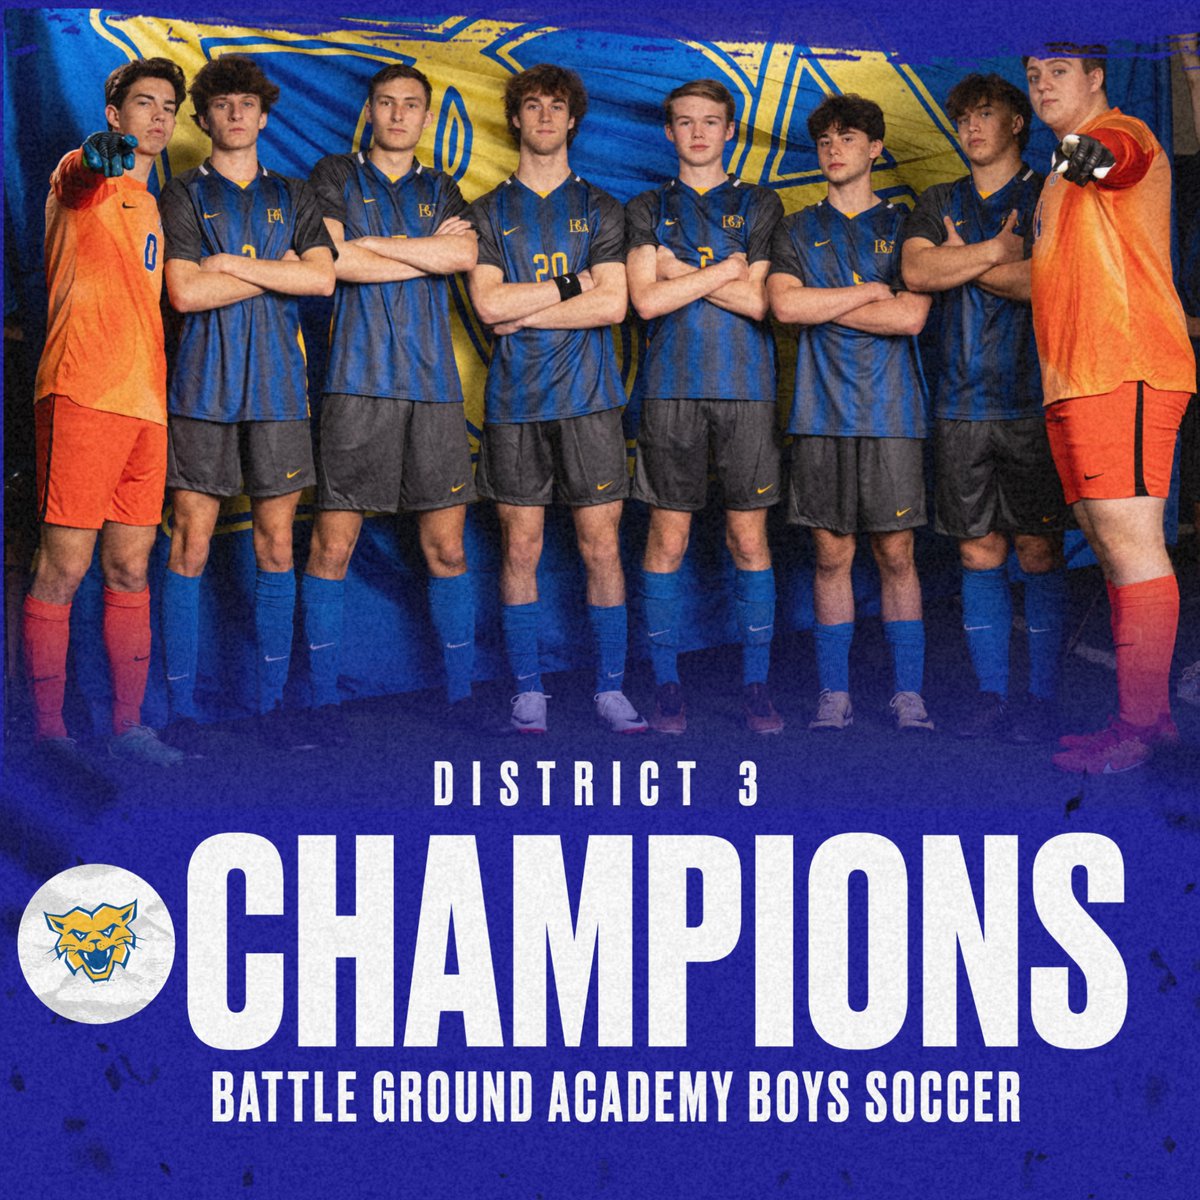 Congratulations to our Boys Soccer Team on winning the District Championship. We are proud of your effort and success! Best of luck in the Region Tournament! @bgawildcats @whsports @cspulliam